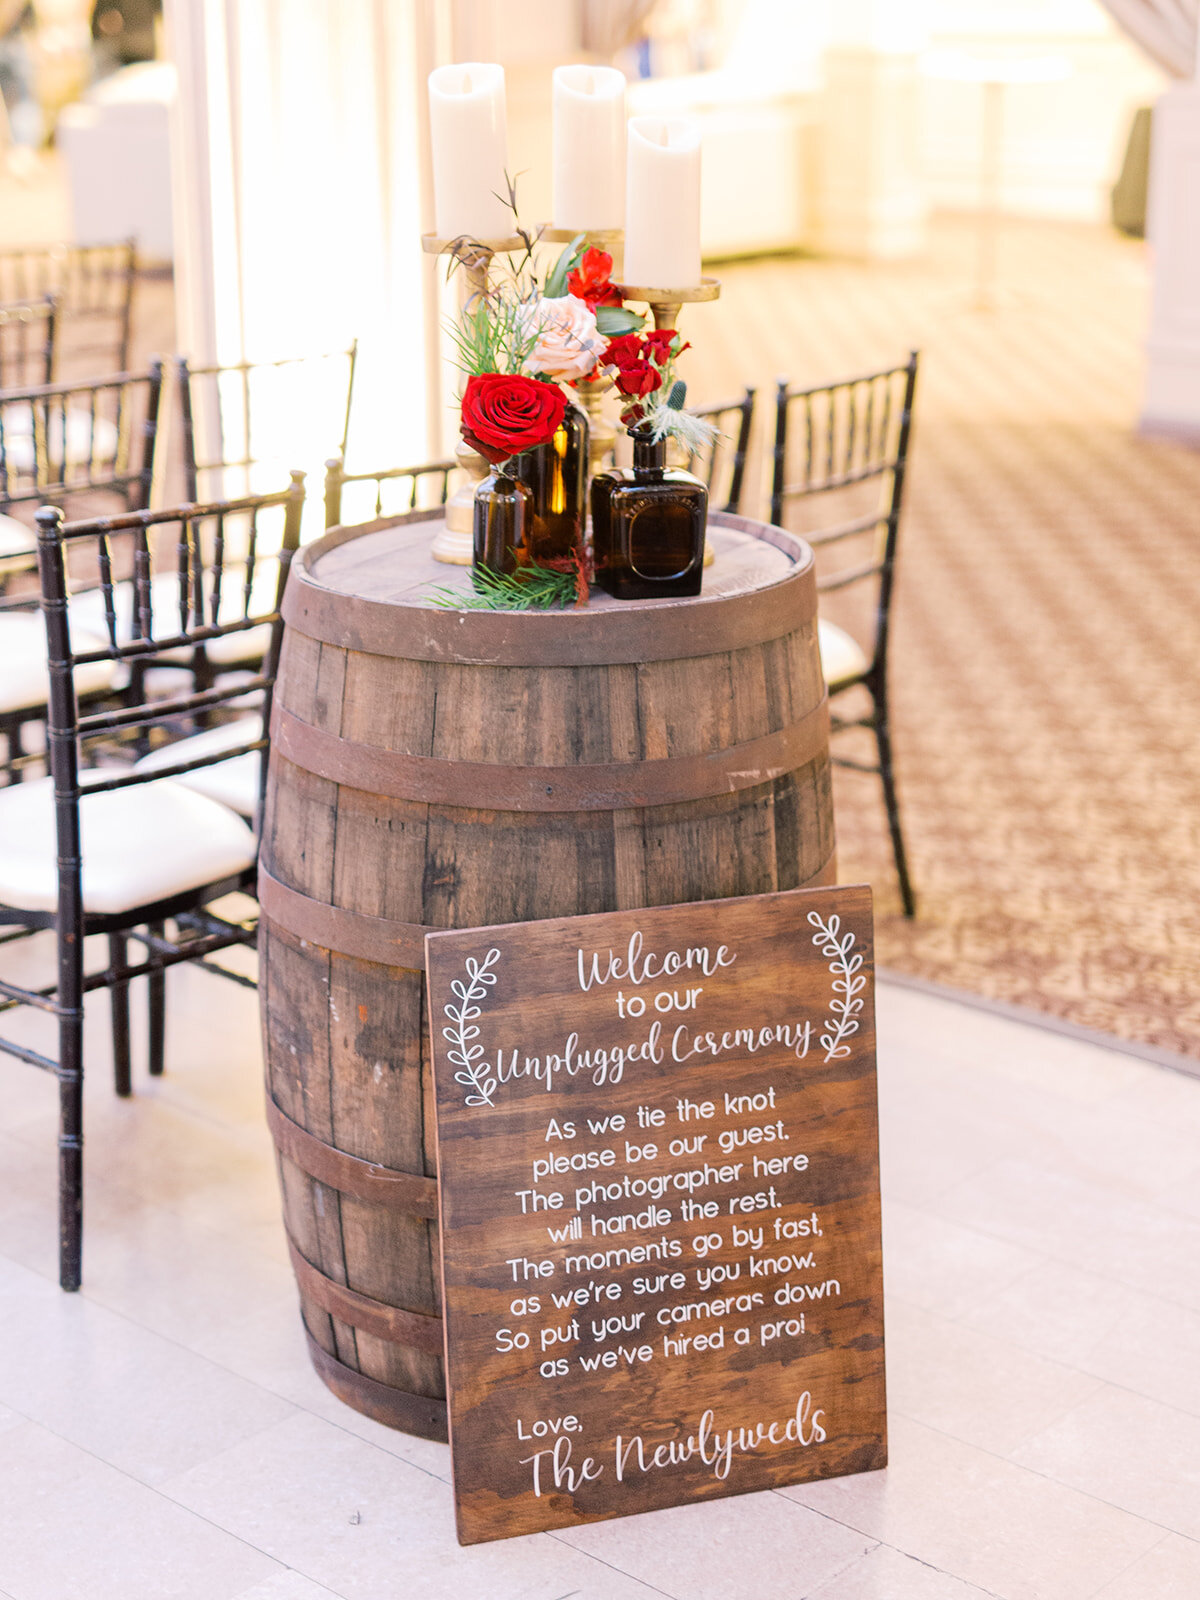 Unplugged ceremony with a whiskey barrel. 